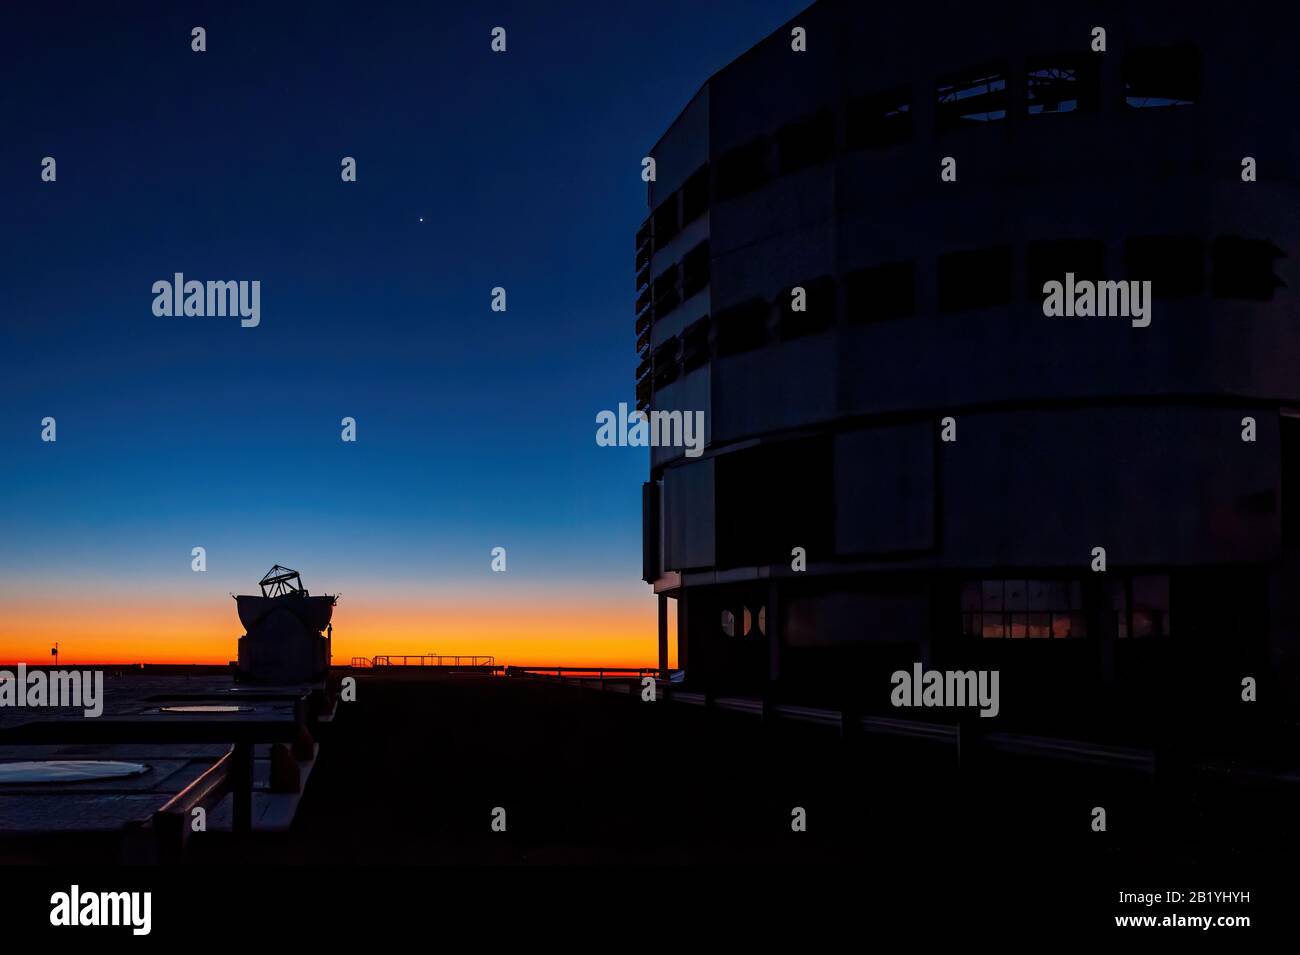 The Very Large Telescope compound at Paranal, Chile Stock Photo